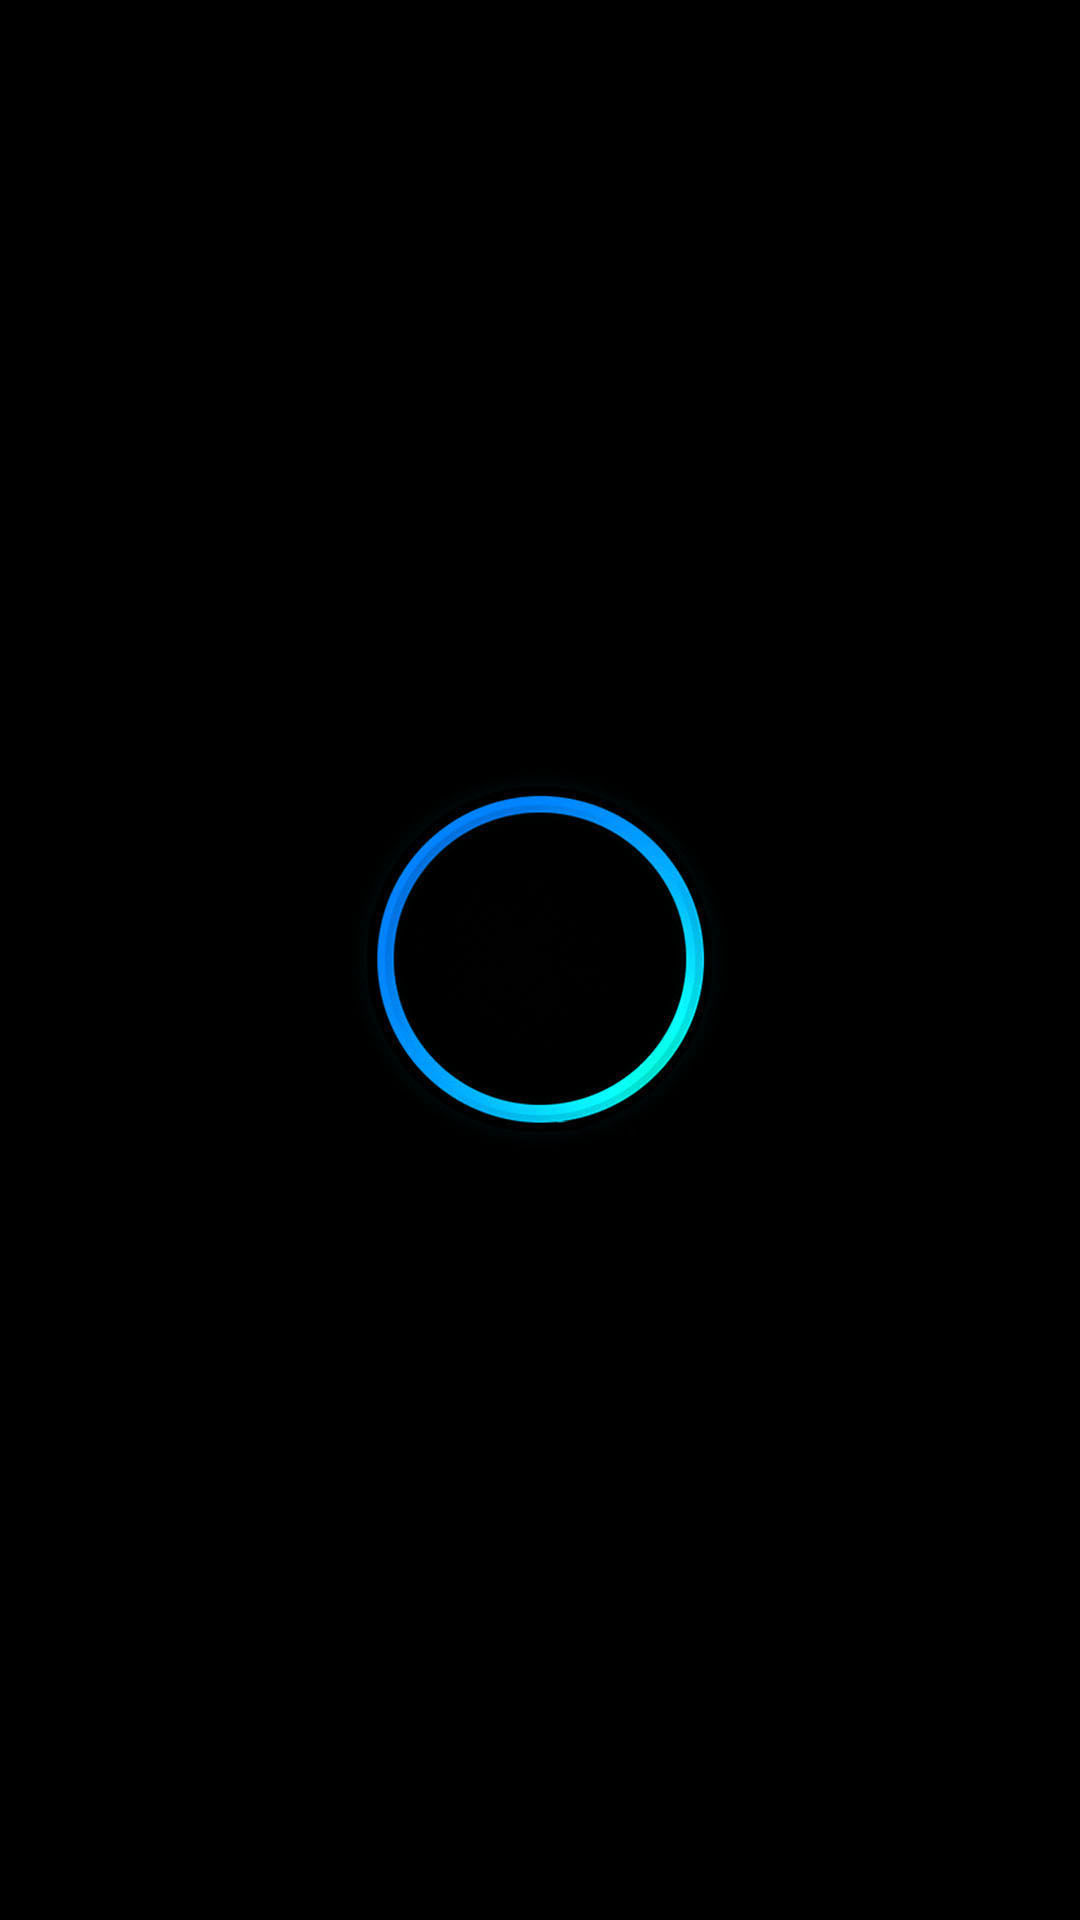 Turquoise Blue Circle Minimal Android Wallpaper free download